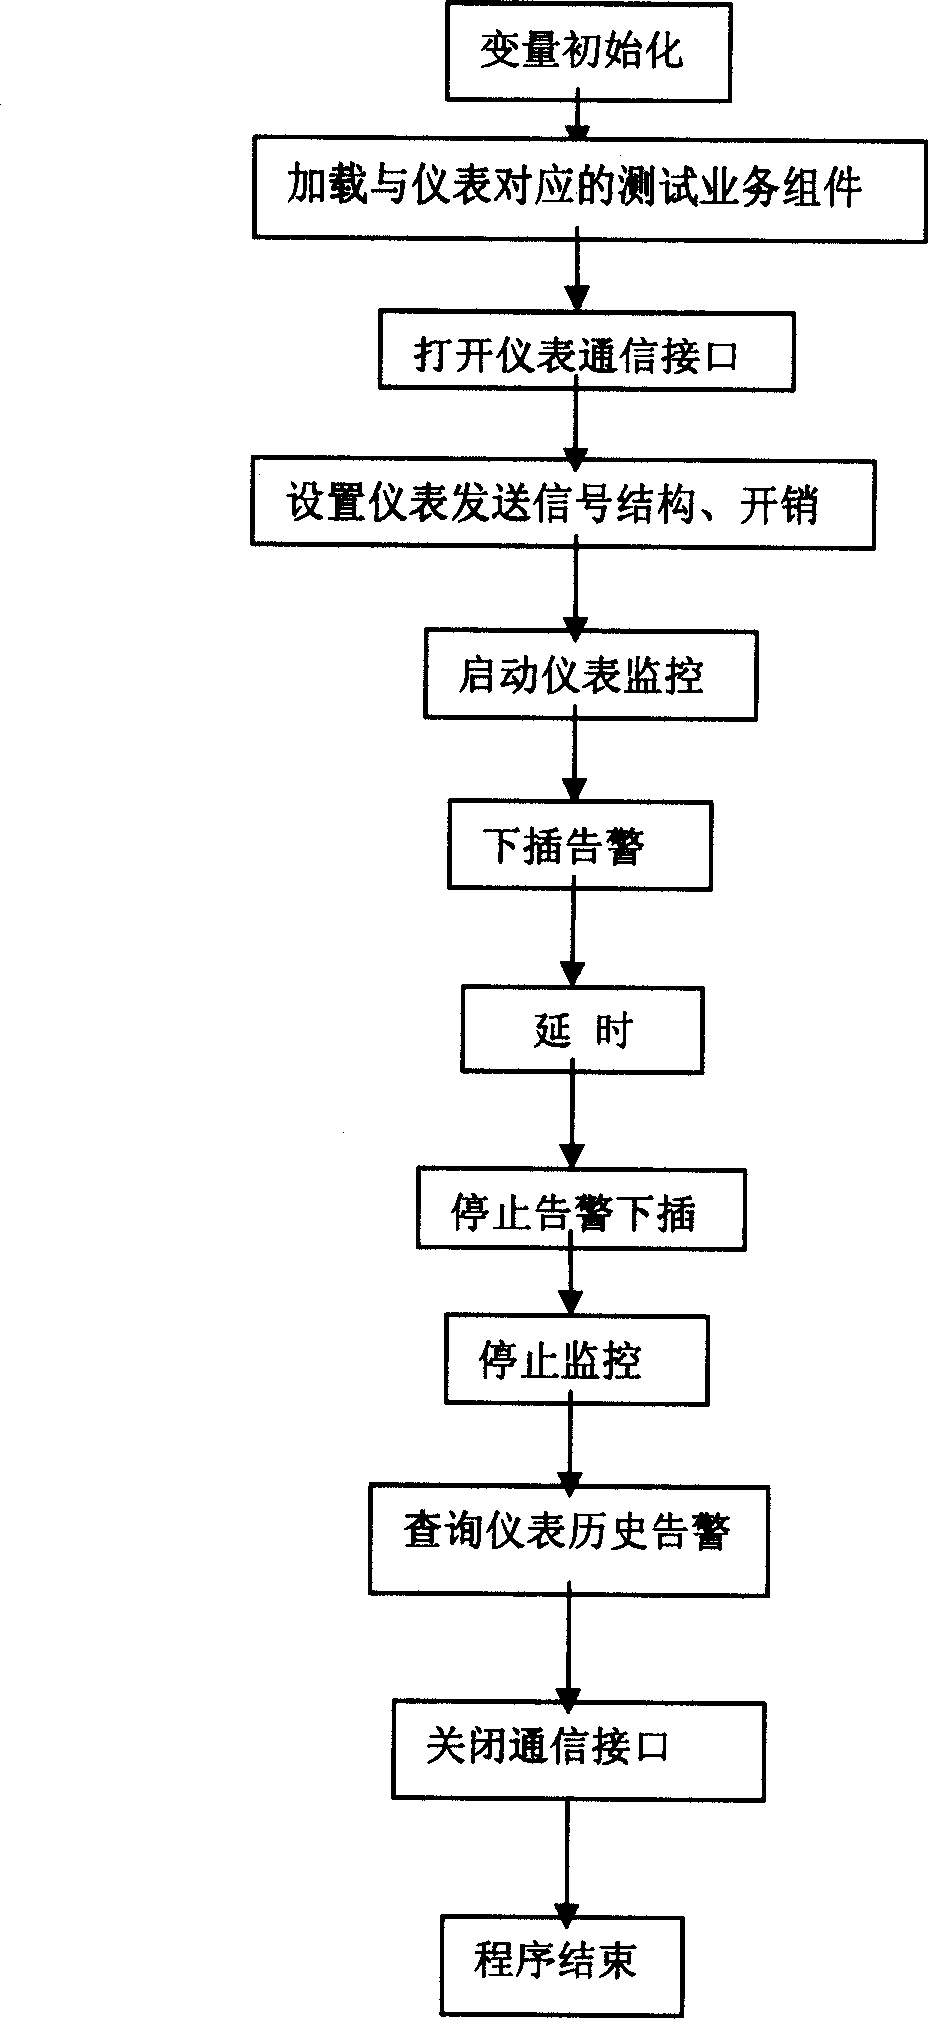 Remote control method and apparatus for synchronous digital system analyzer